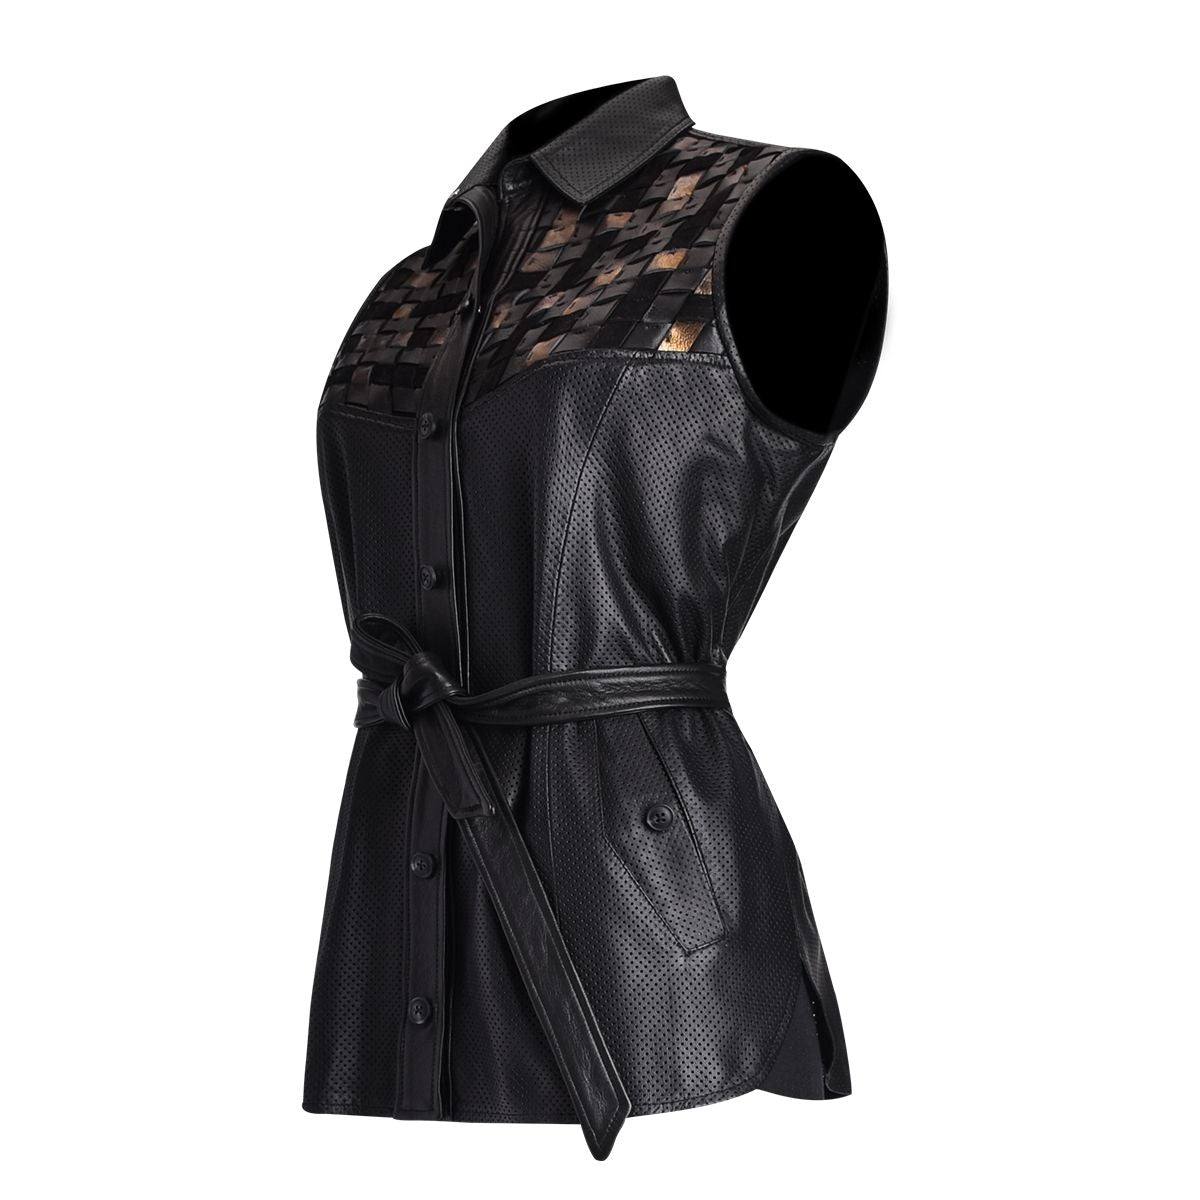 M265BOB - Cuadra black casual woven perforated leather vest for women-Kuet.us